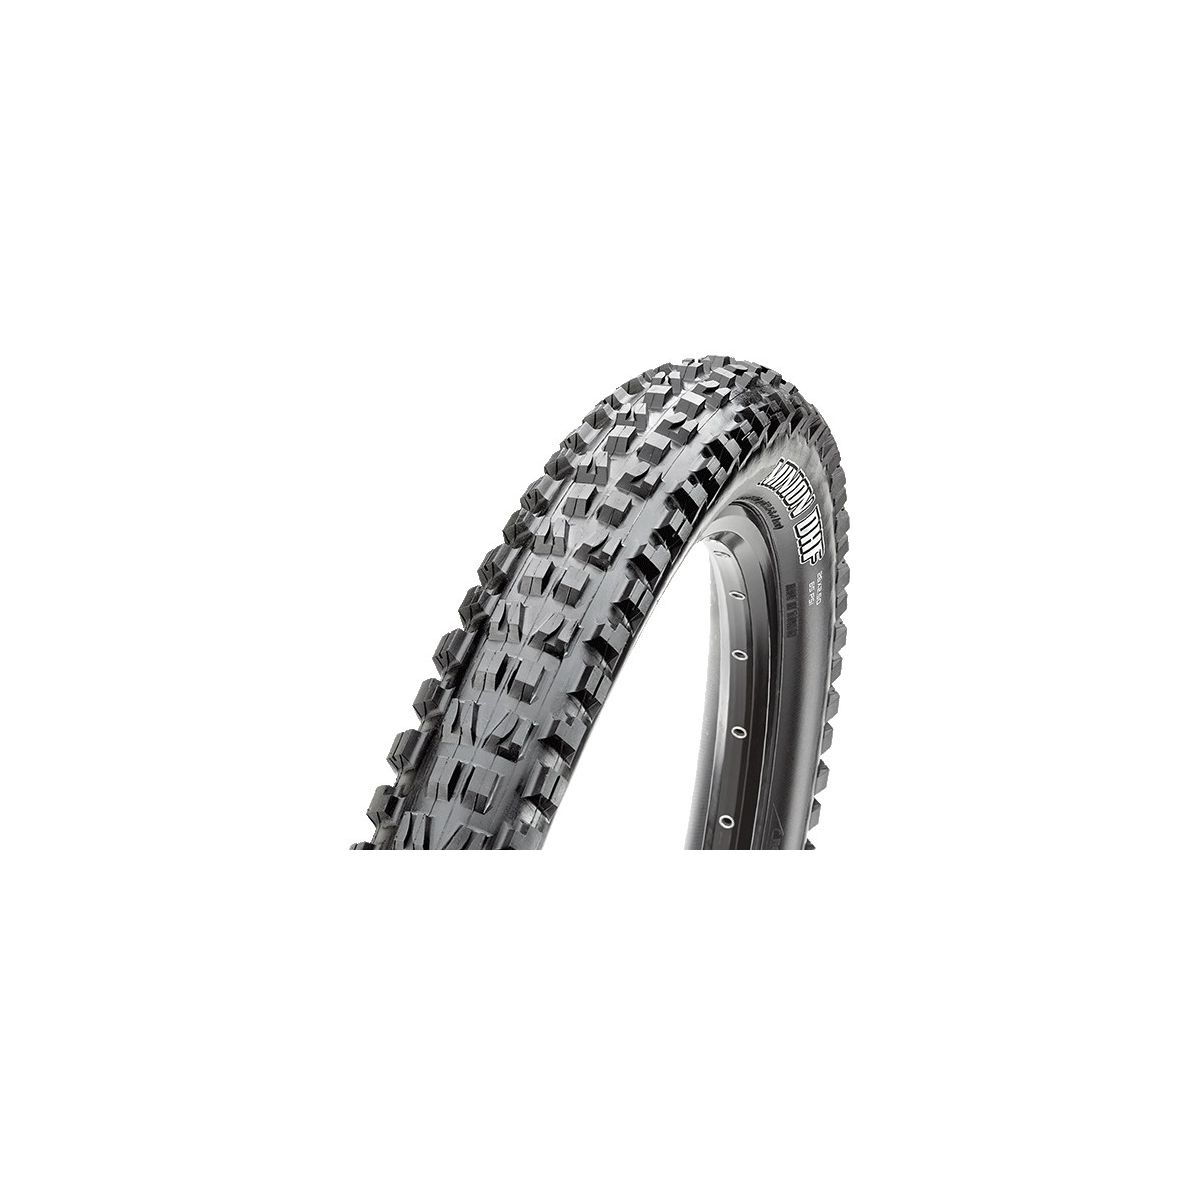 Comprar Maxxis Minion Front 27.5"+ x 2.80 Exo protection Tubeless Ready